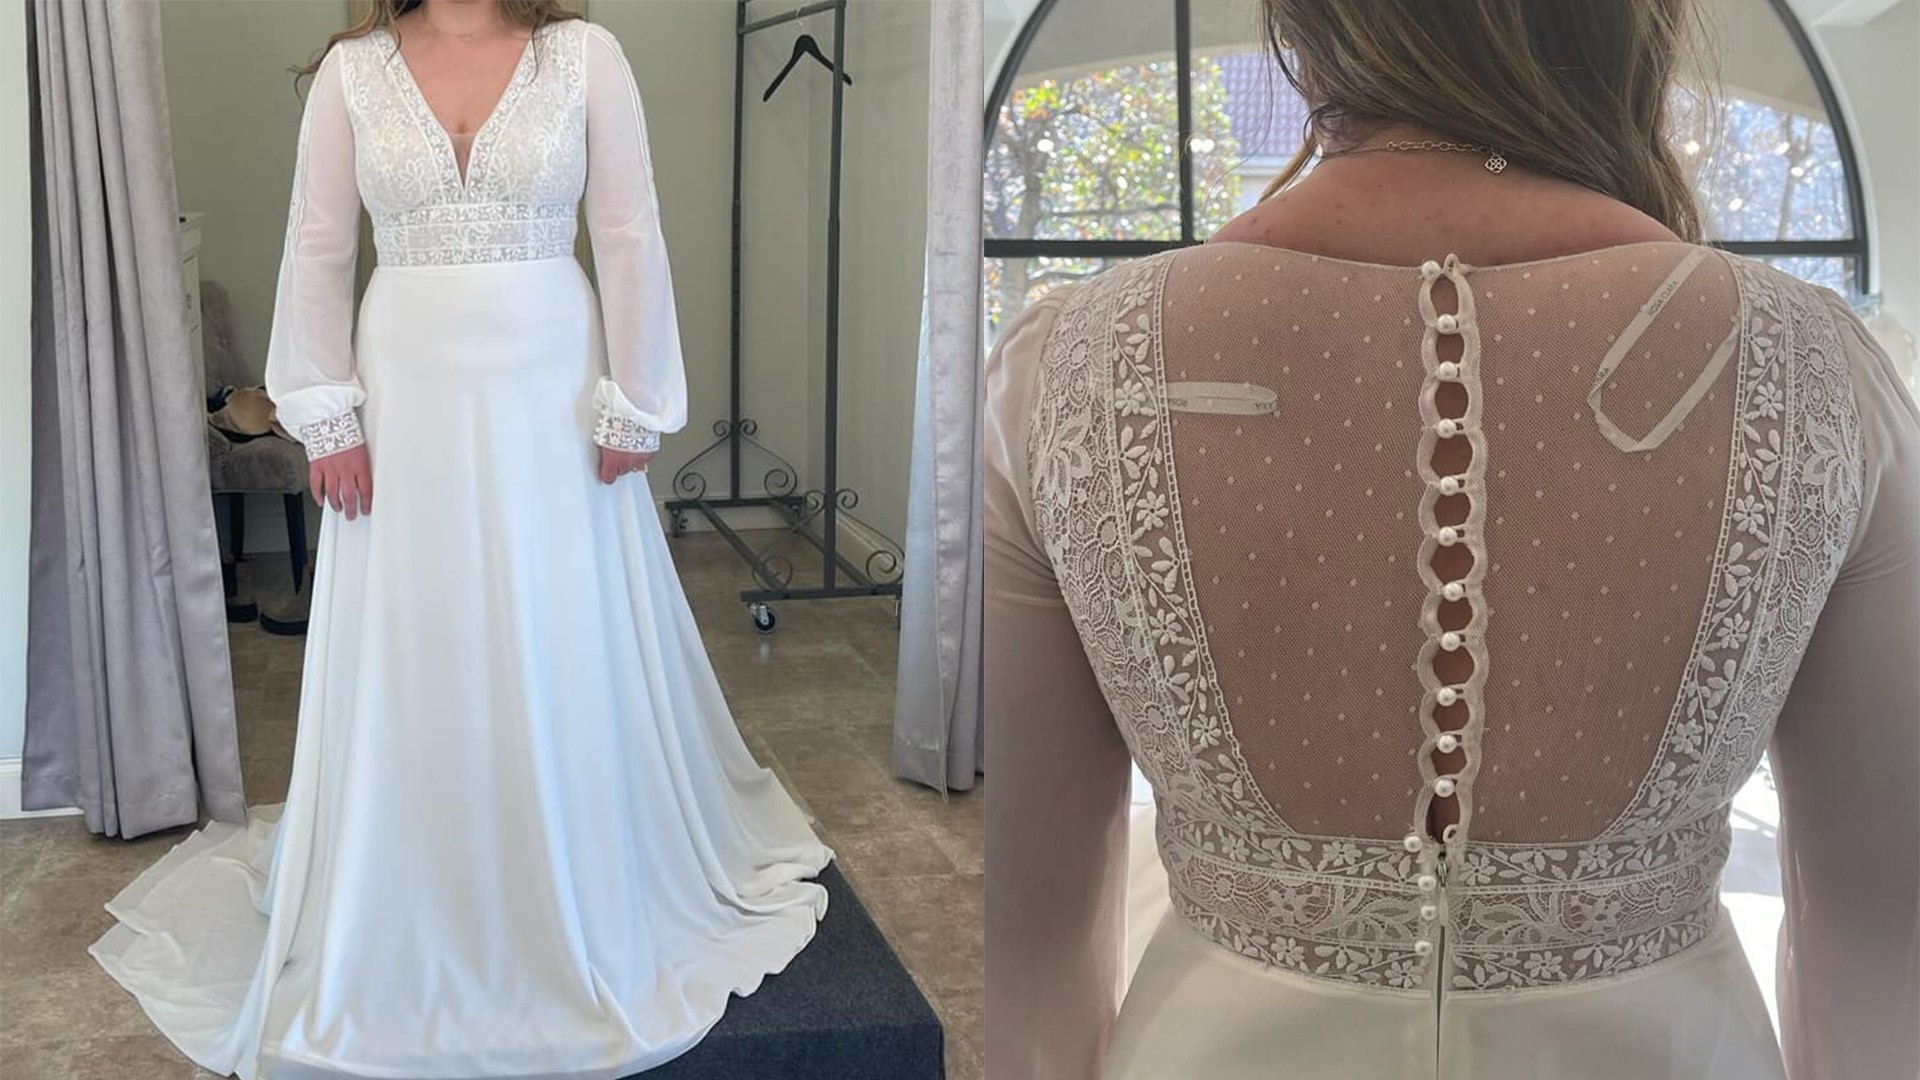 A wedding dress that was accidentally donated to Goodwill has been reunited with its owner in Rogers.